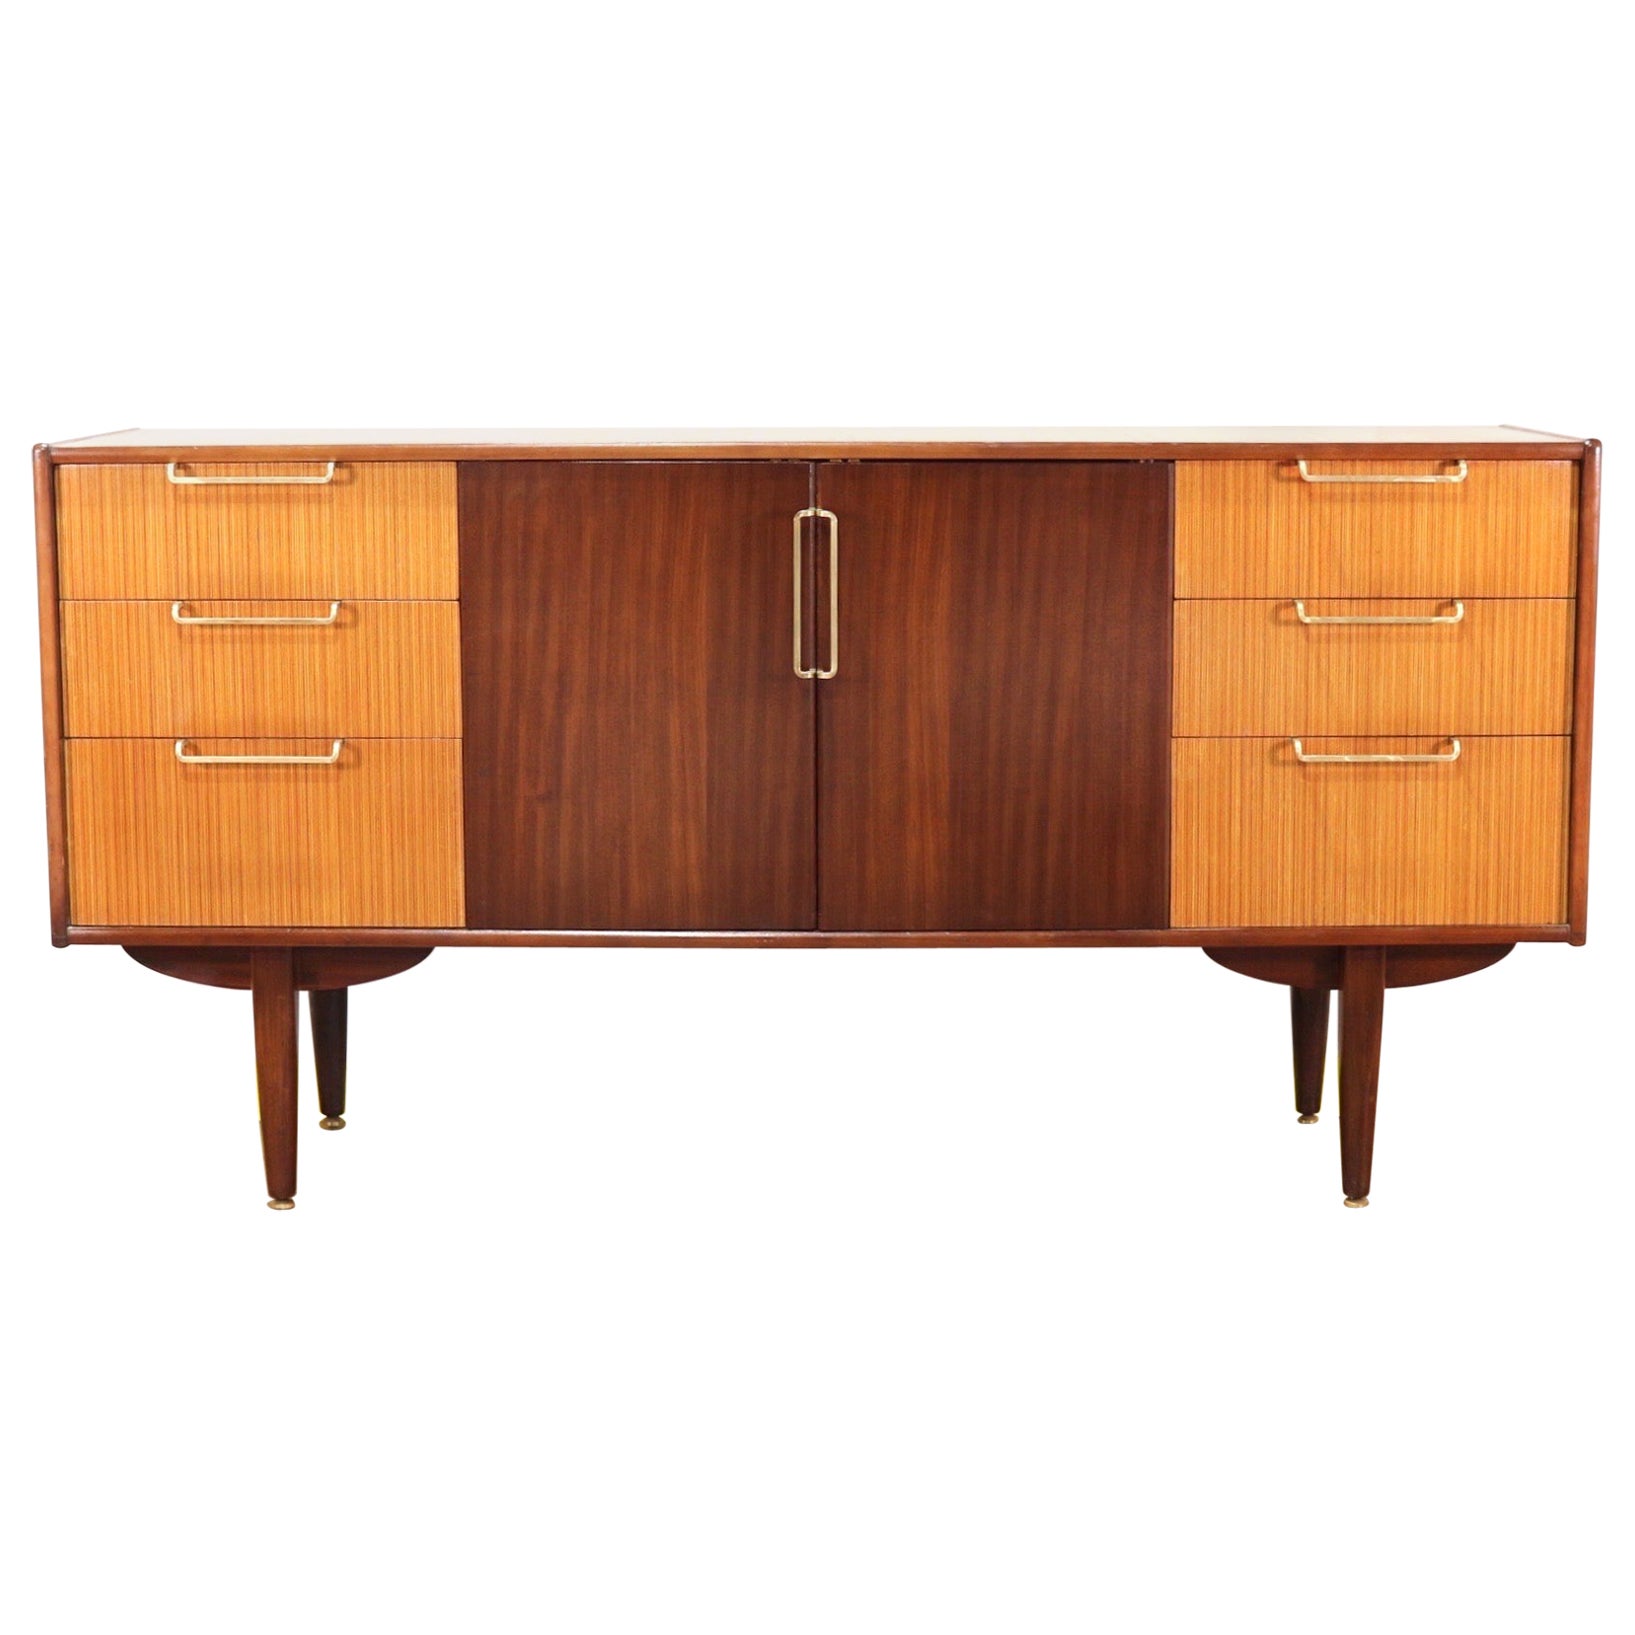 Mid-Century Modern Credenza Sideboard by Beautility